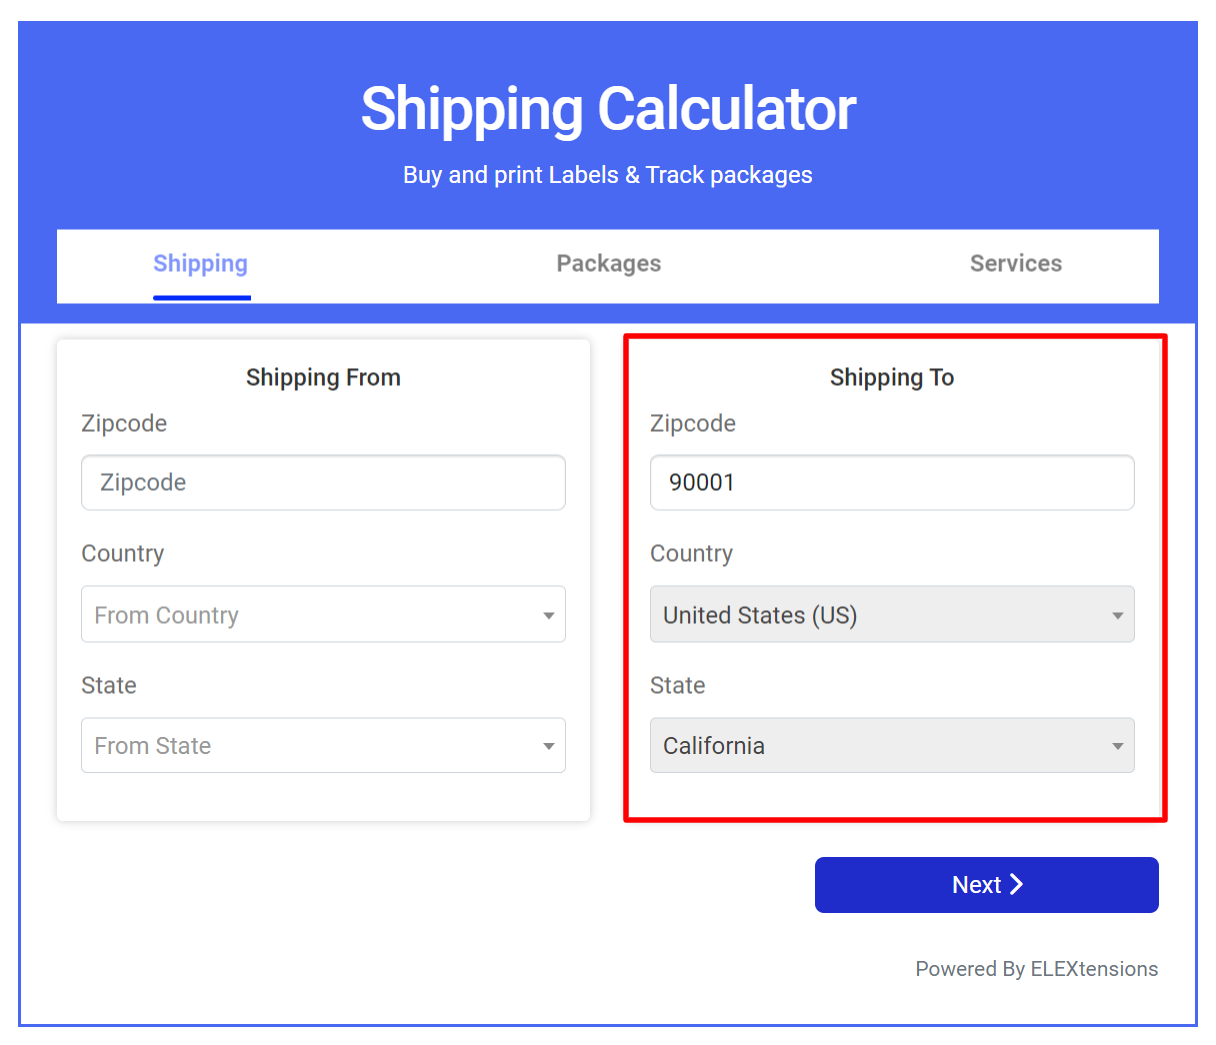 Set Default Shipping From or Shipping To Addresses